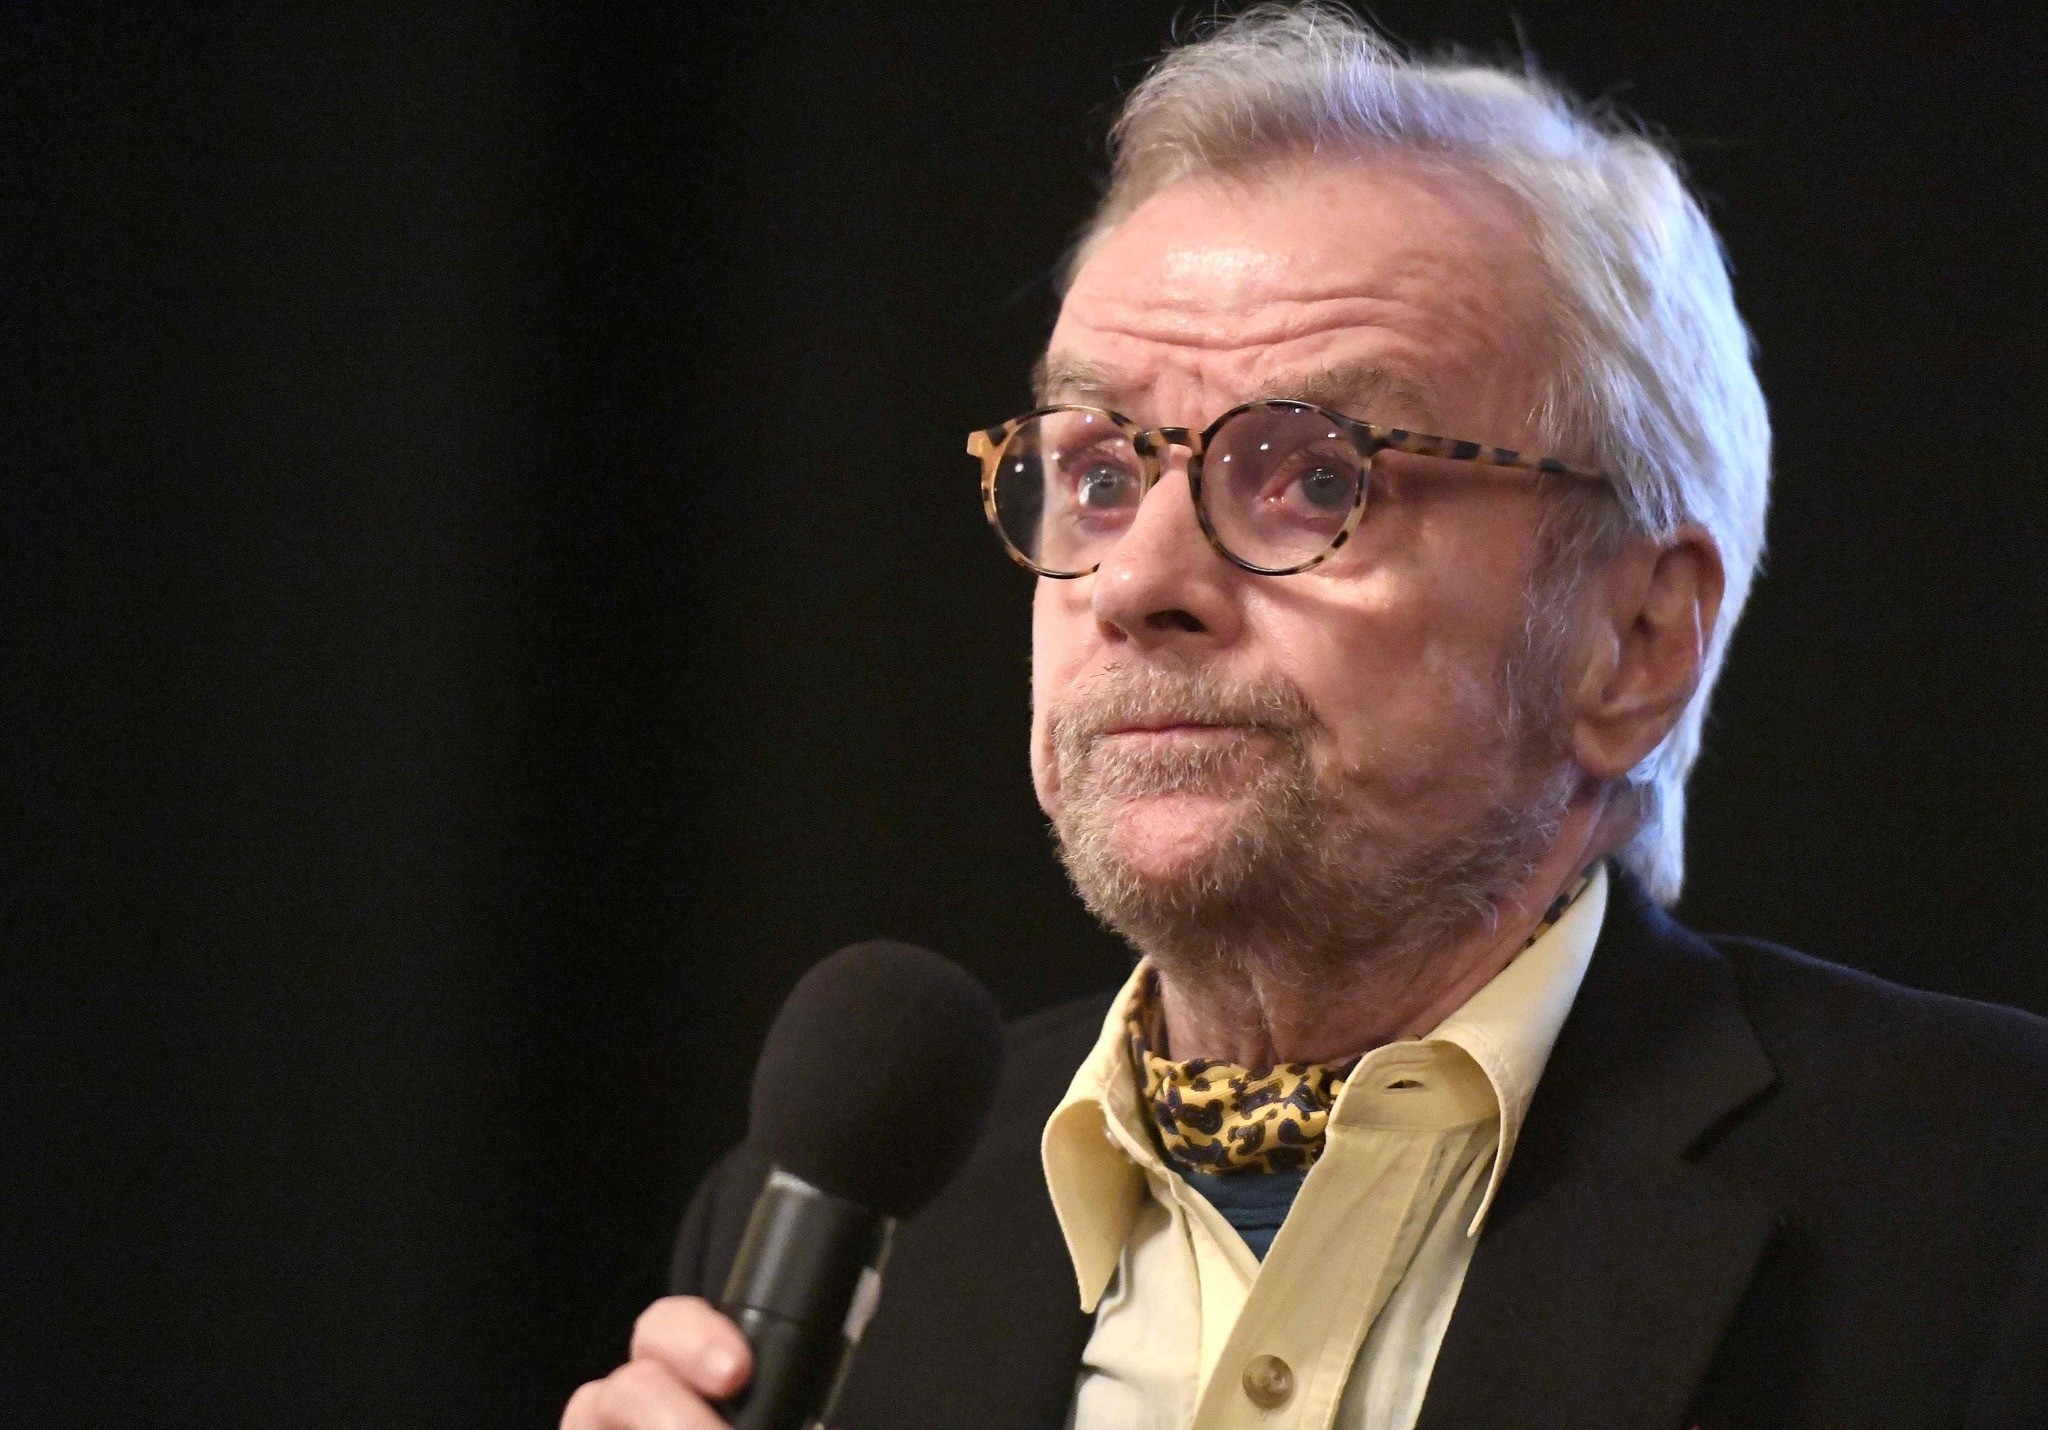 This file photo taken on February 03, 2017 shows director John G. Avildsen speaking onstage at a screening of 'John G. Avildsen: King of the Underdogs'  (AFP Photo)